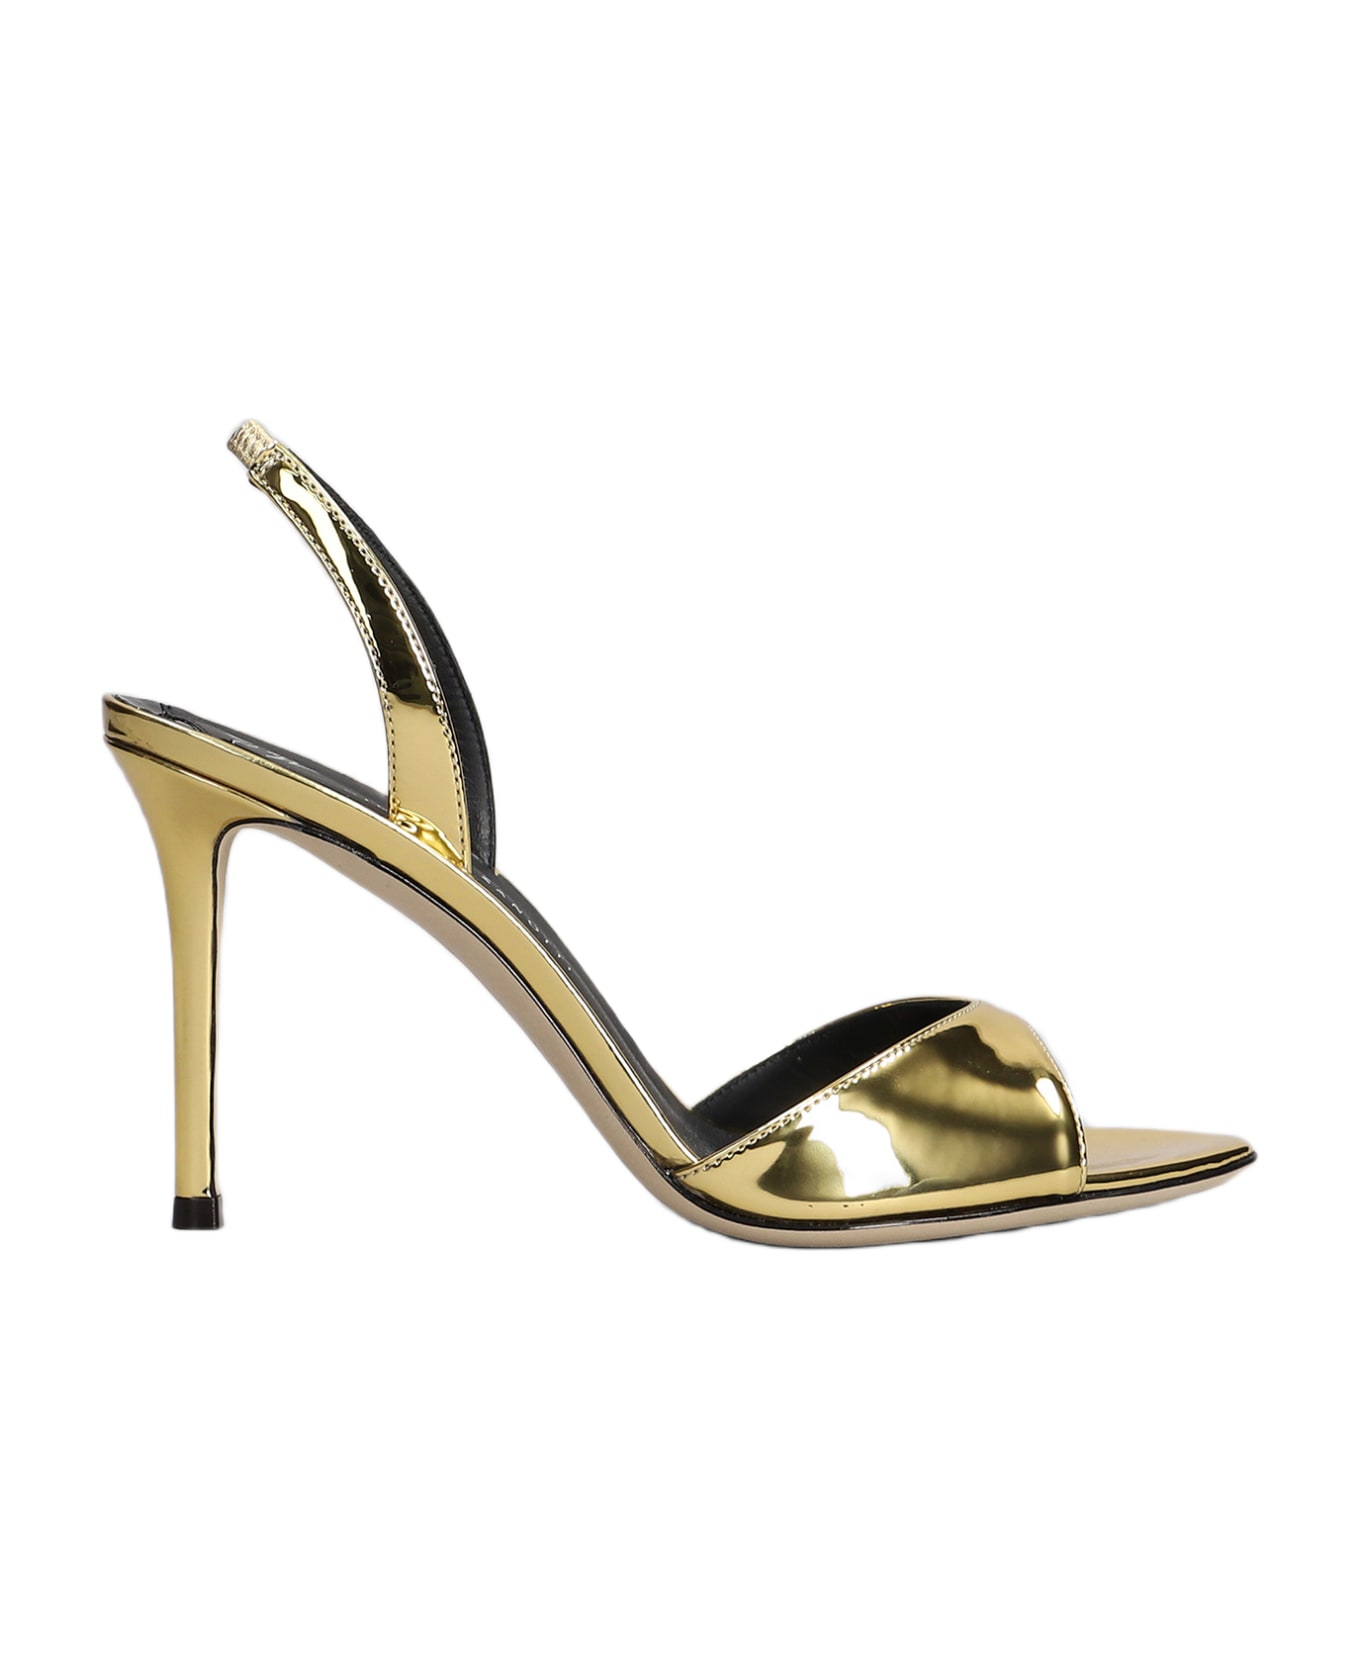 Giuseppe Zanotti Sandals In Gold Patent Leather - gold